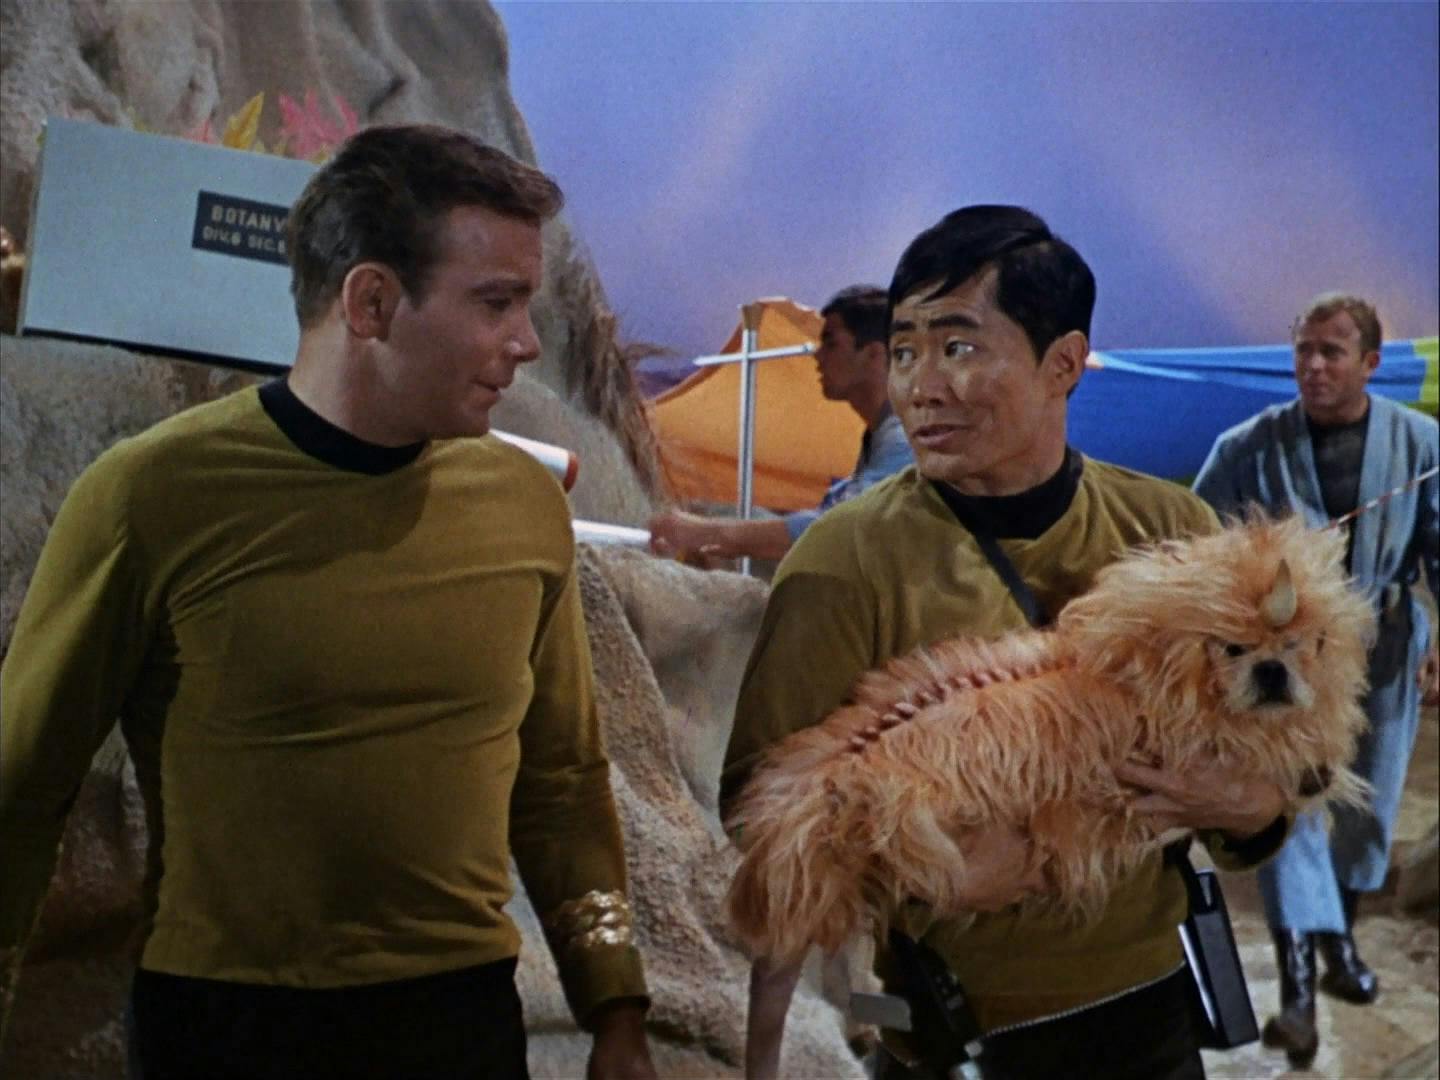 Captain Kirk talks to Sulu, who is holding an alien. The alien is a dog in a costume with a horn on its head.